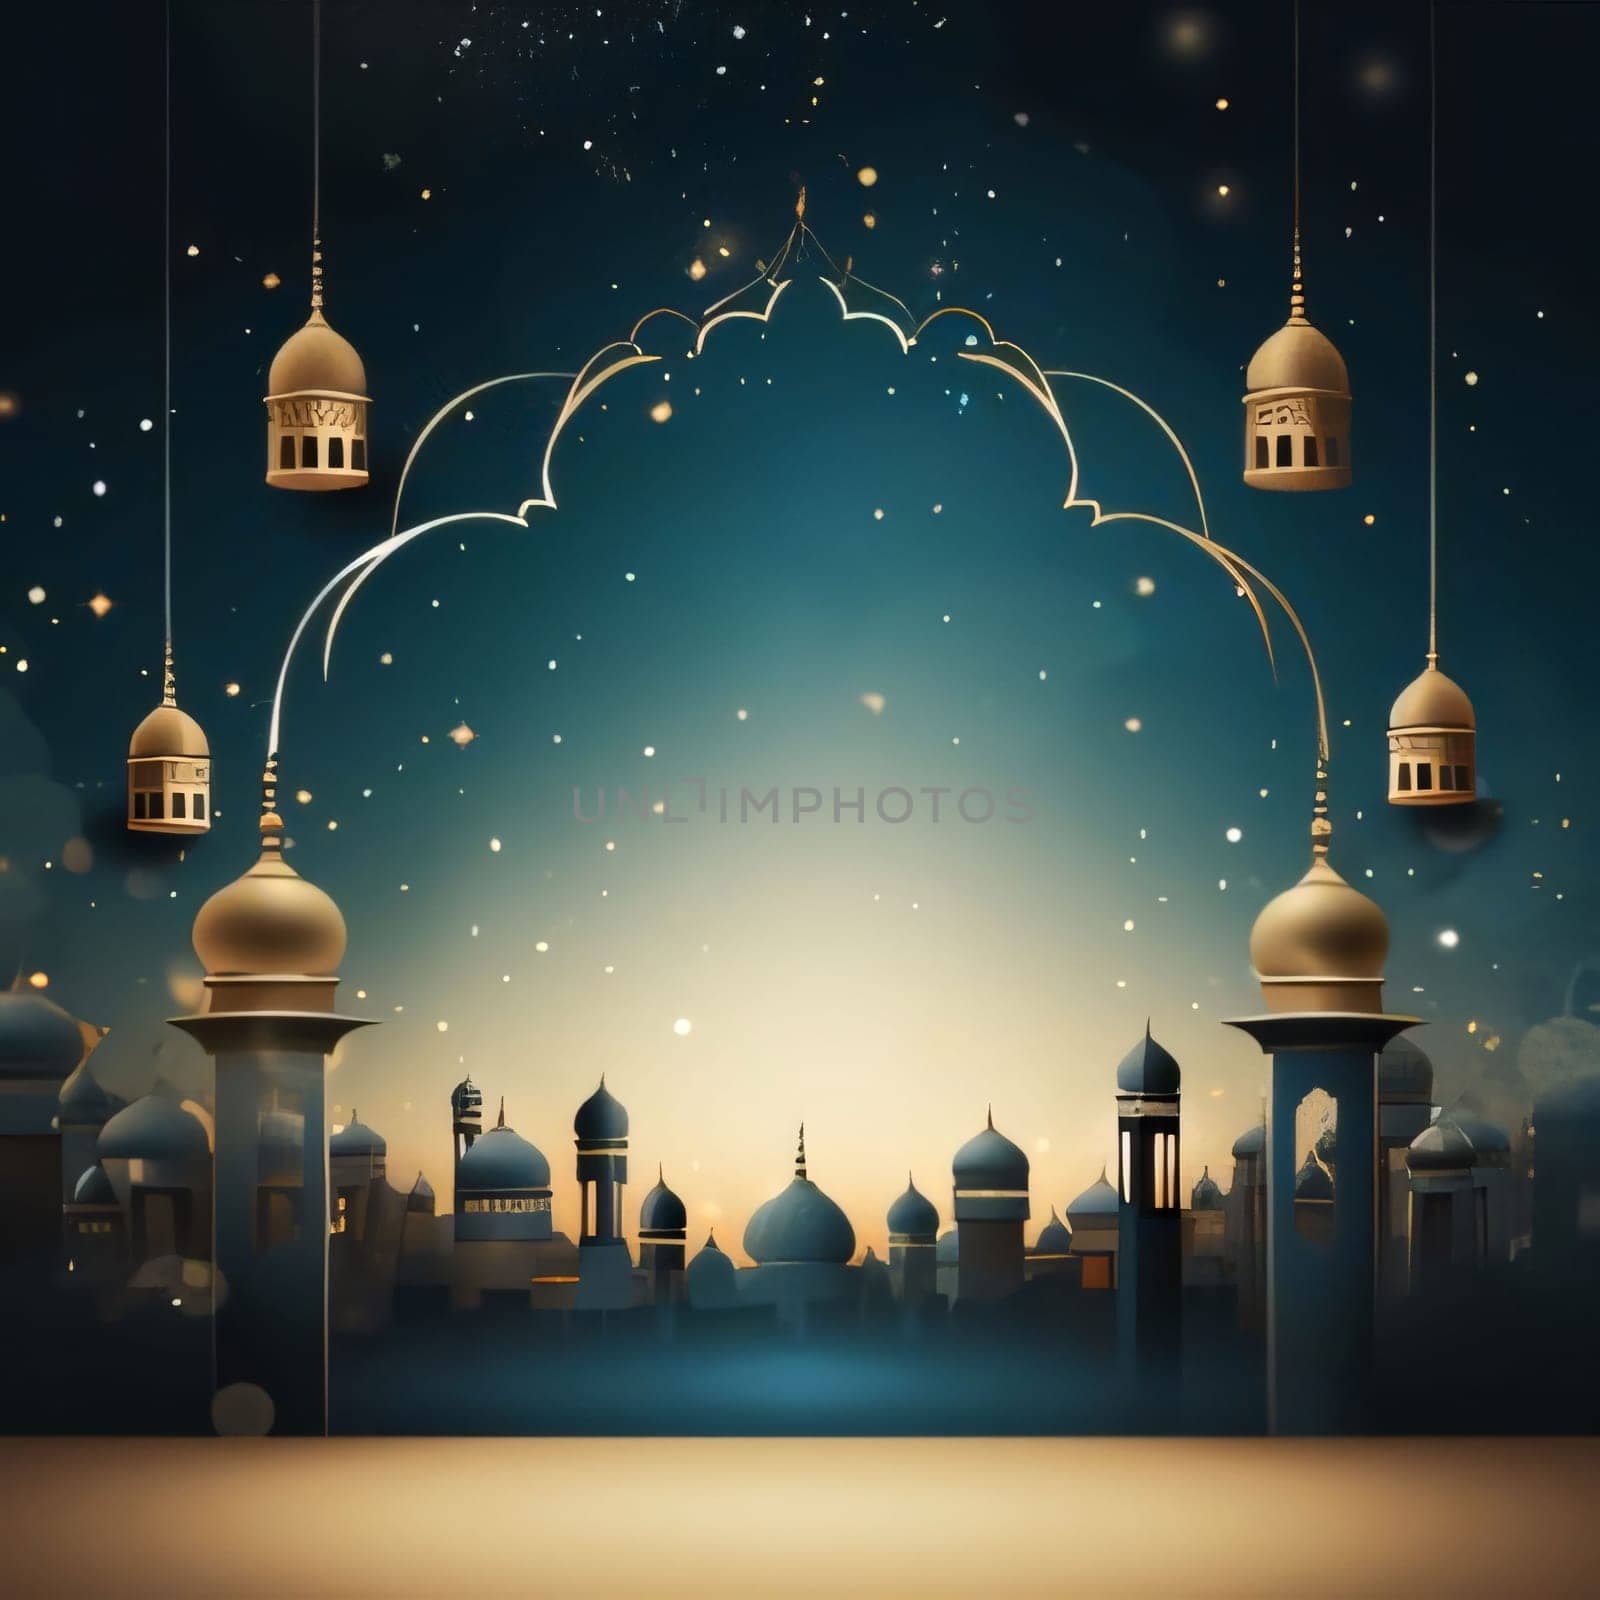 Illustration of hanging golden lanterns in the background high towers minarets, mosques. Lantern as a symbol of Ramadan for Muslims. A time to meet with God.